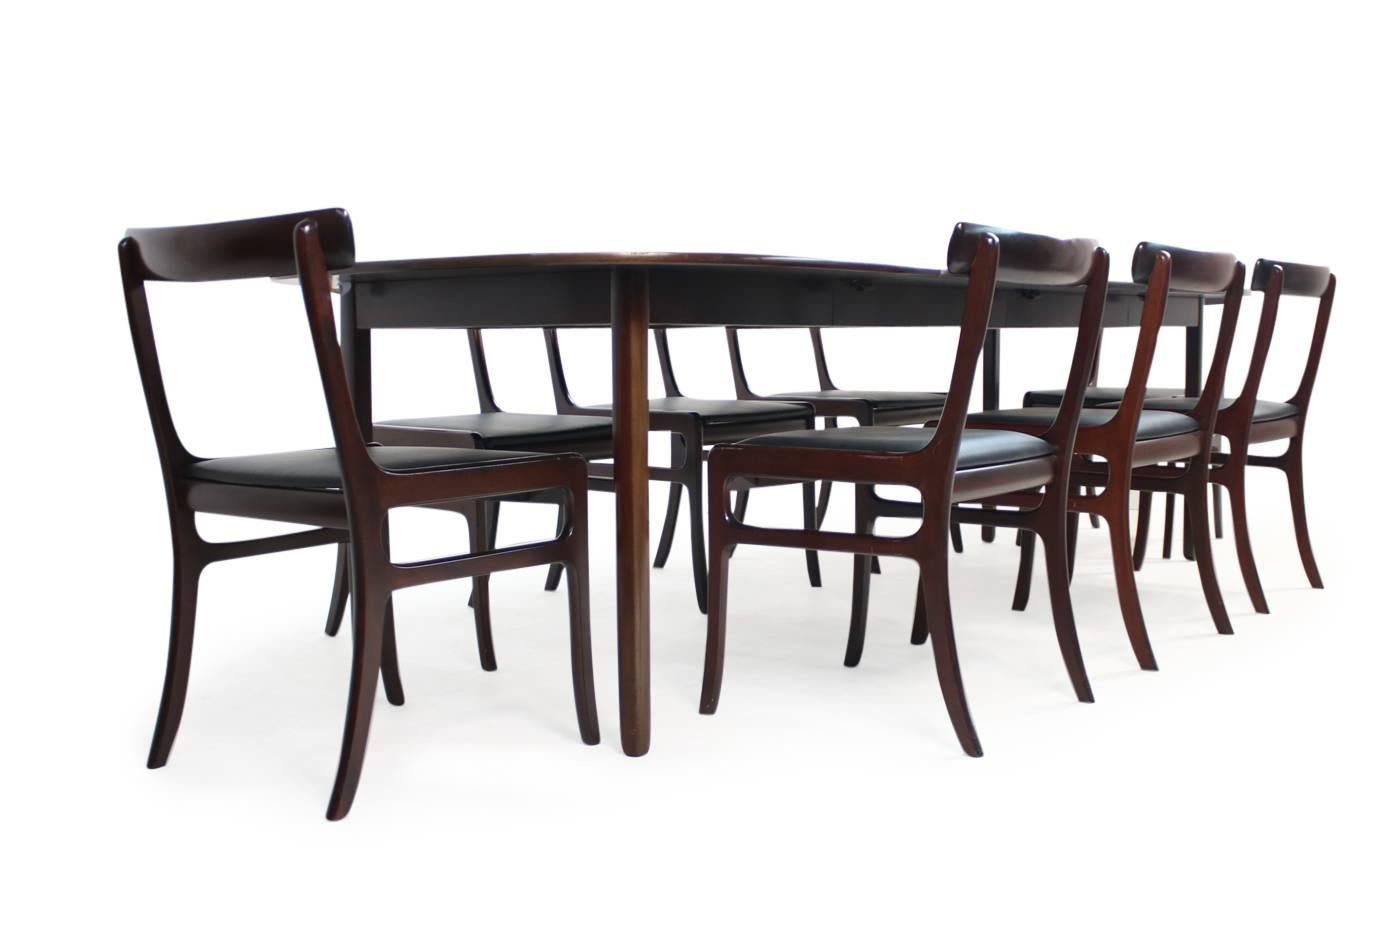 Beautiful and large 1960s dining set, by Ole Wanscher for PJ Denmark (Poul Jeppesen) made of dark mahogany, Mod. 'Rungstedlund' with eight chairs,
All eight chairs with new upholstery and covered with black real high quality leather. Very exclusive